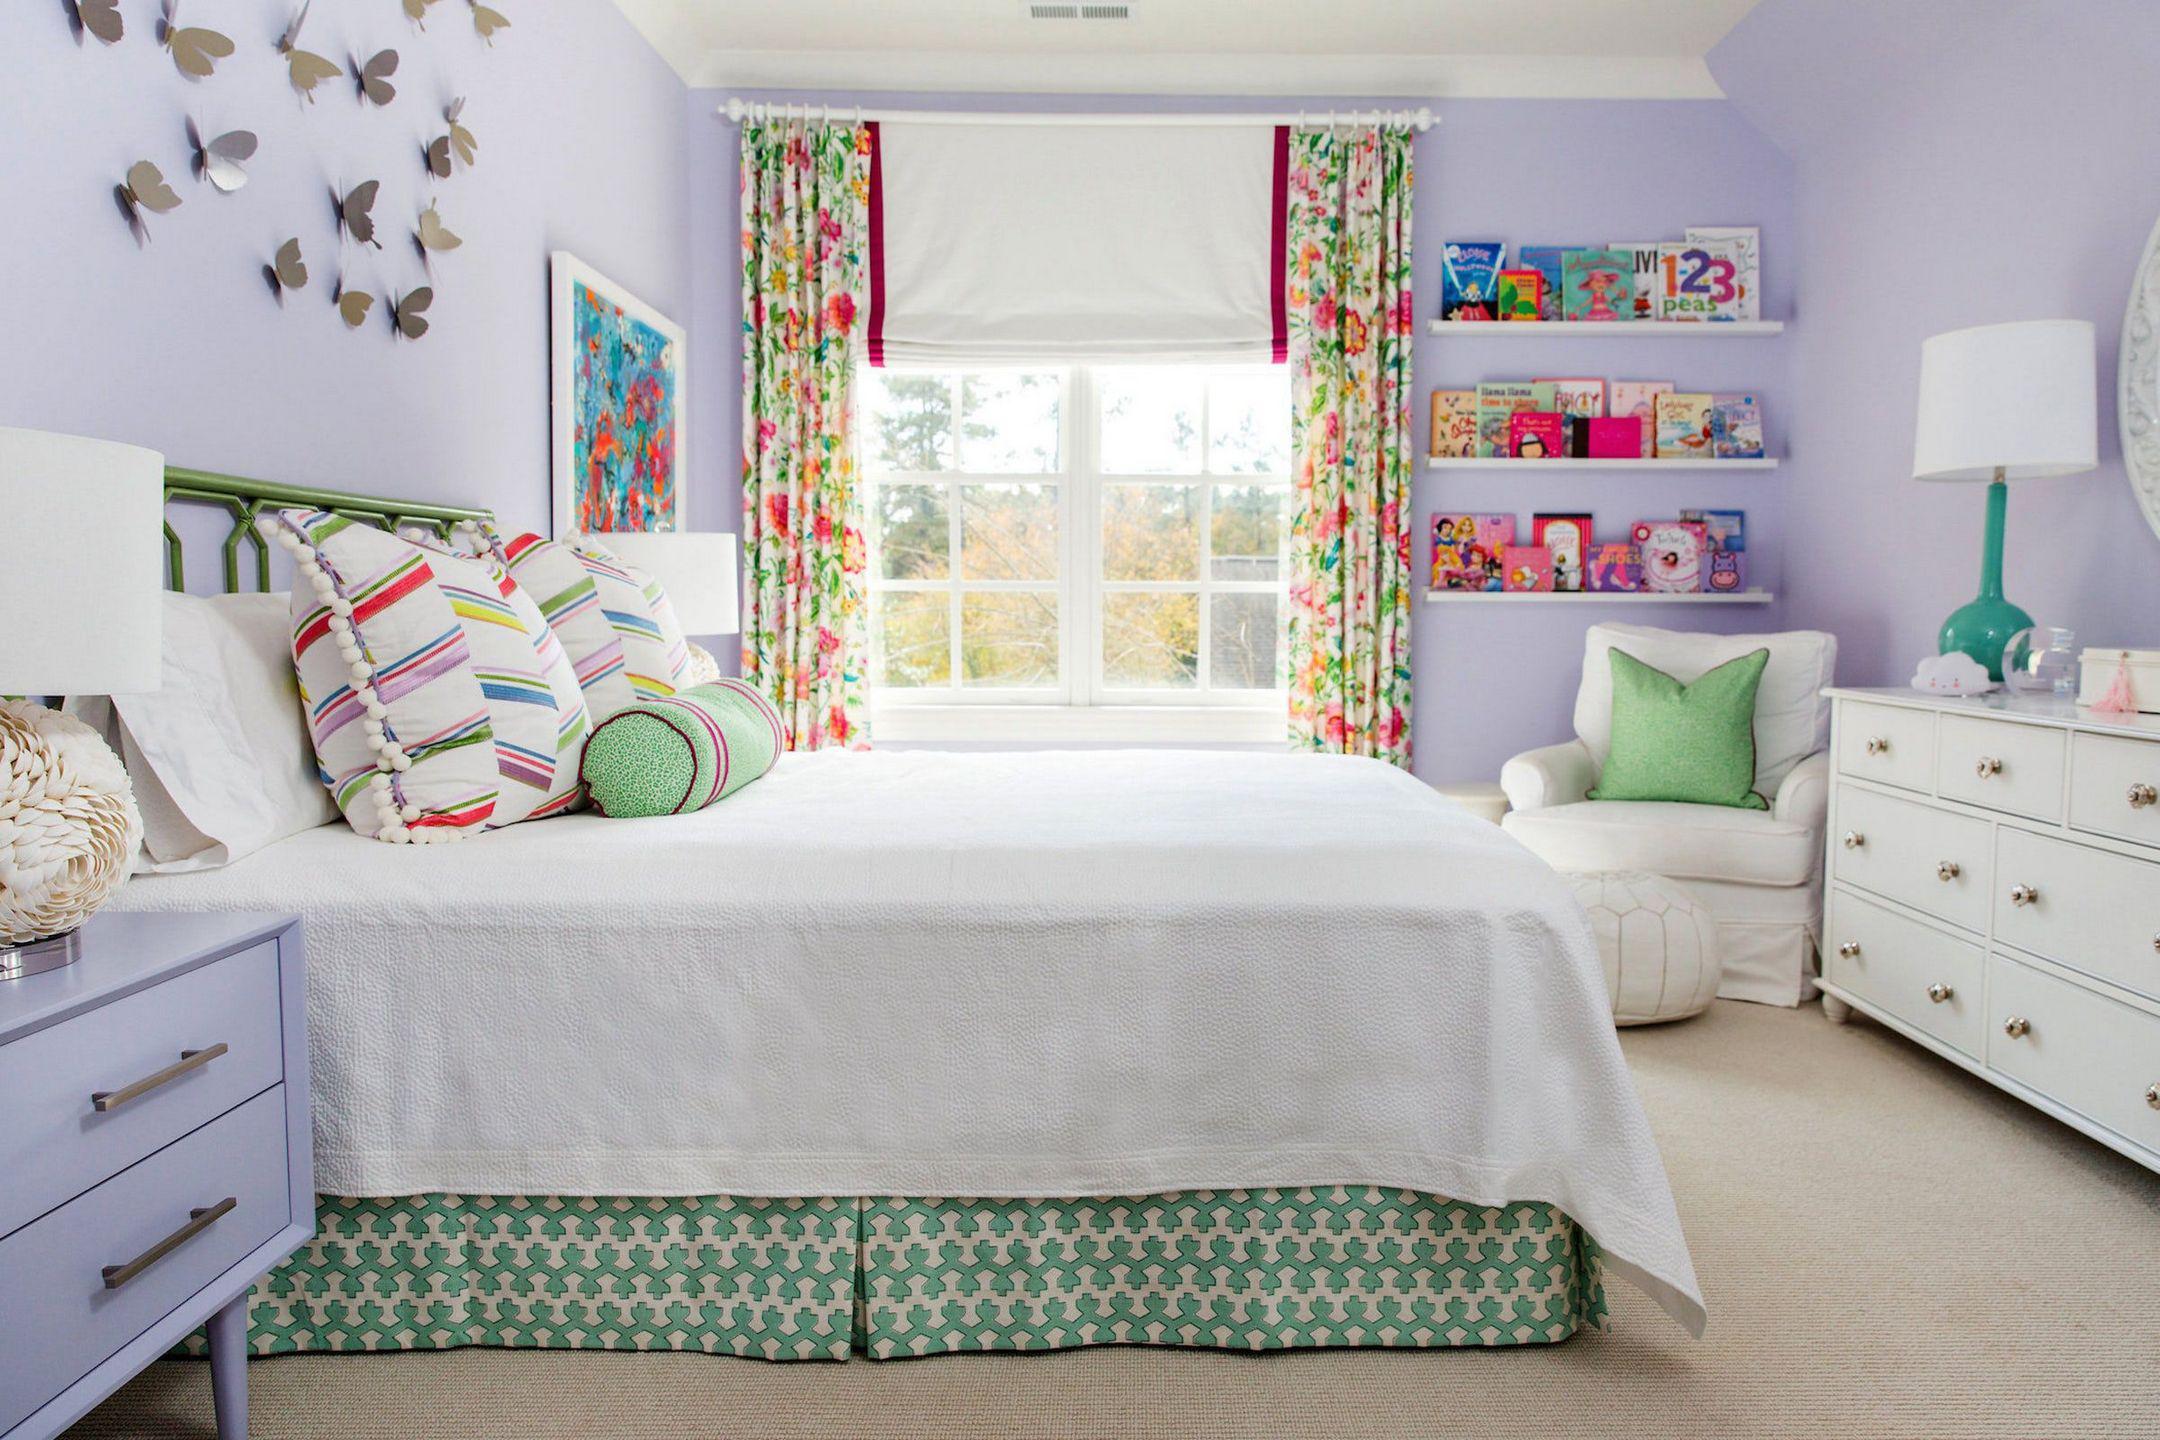 Girls Bedroom Ideas For Small Rooms